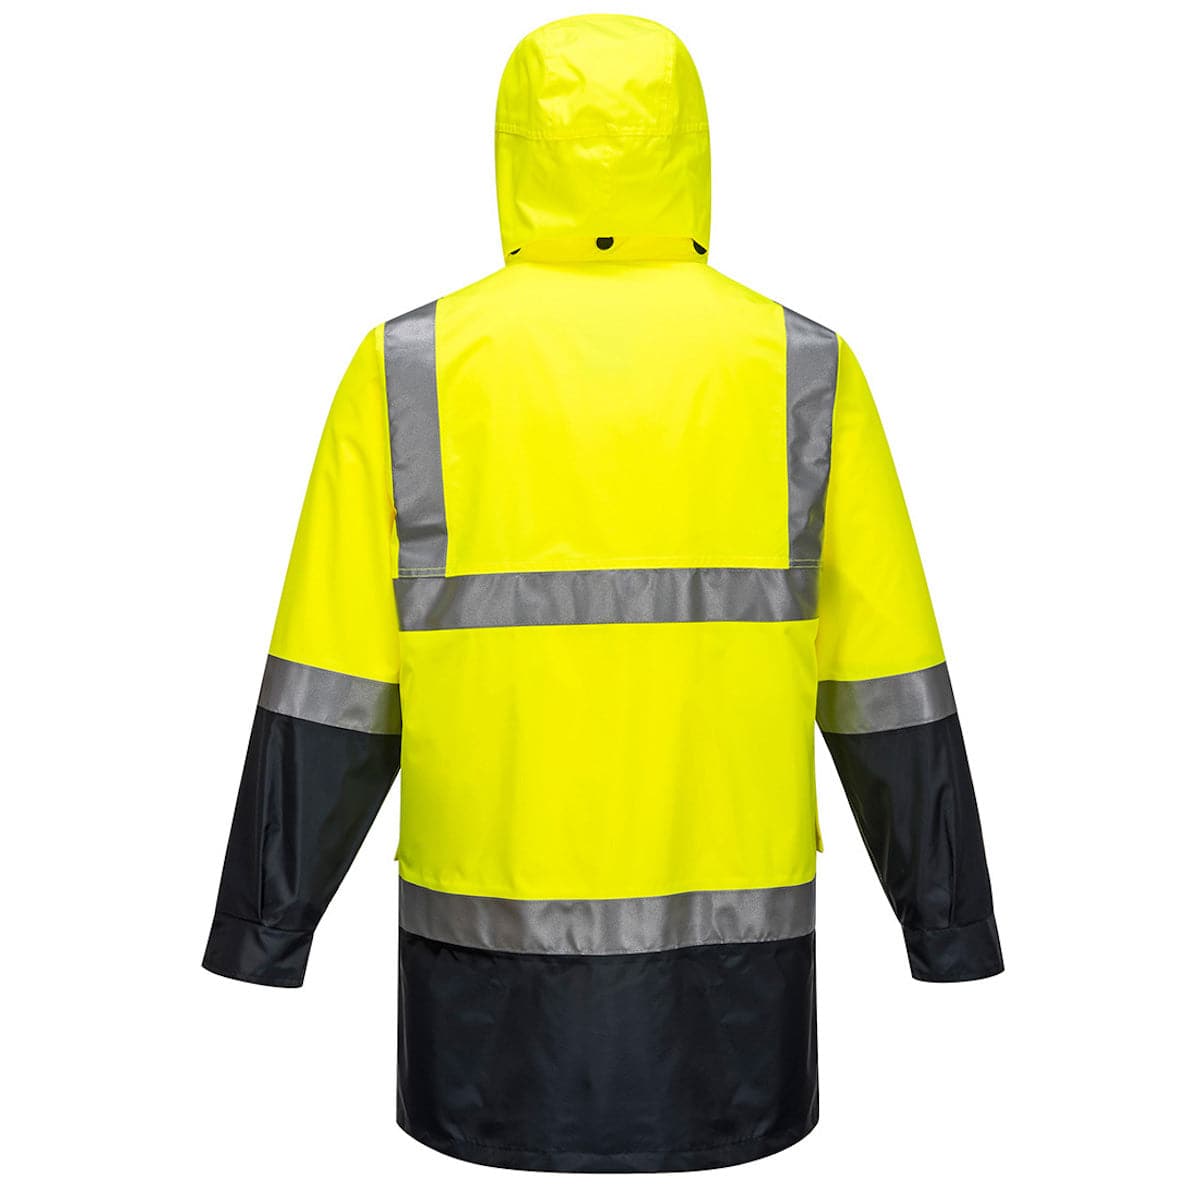 Portwest Eyre Day/Night 4-in-1 Jacket MJ881